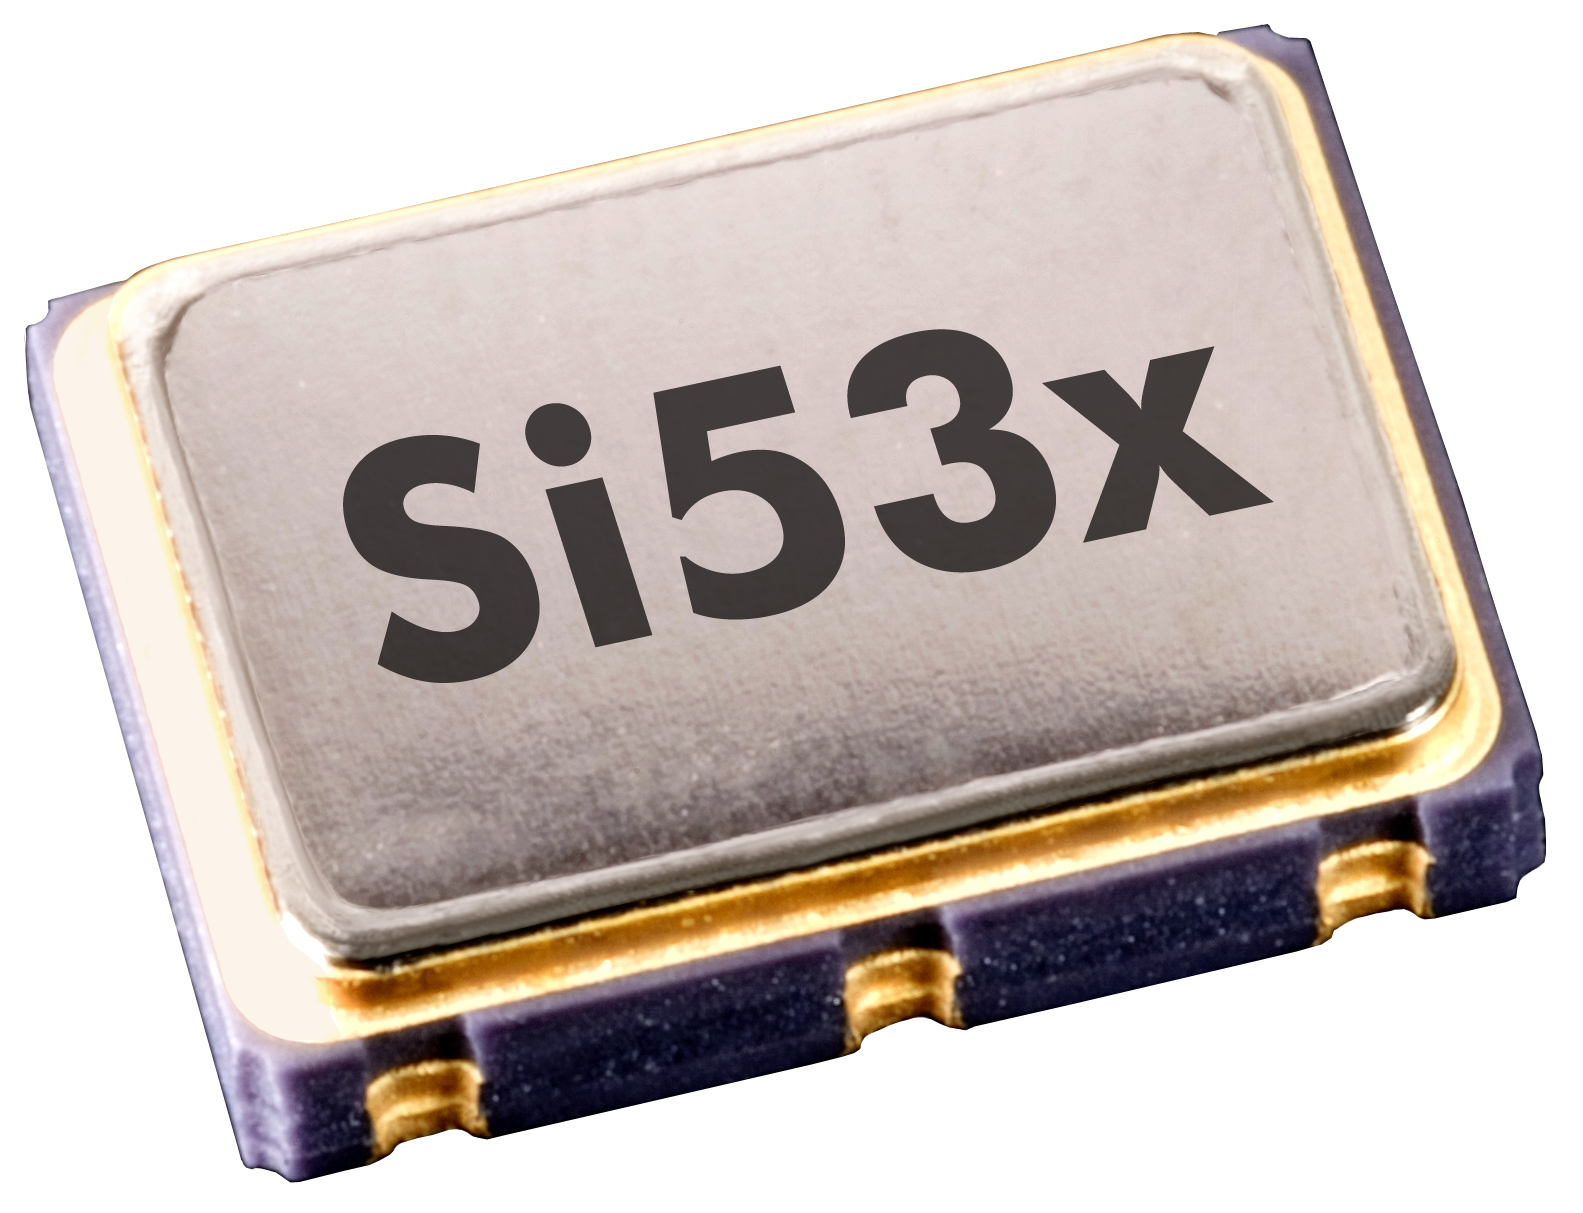 Si53x_Chip